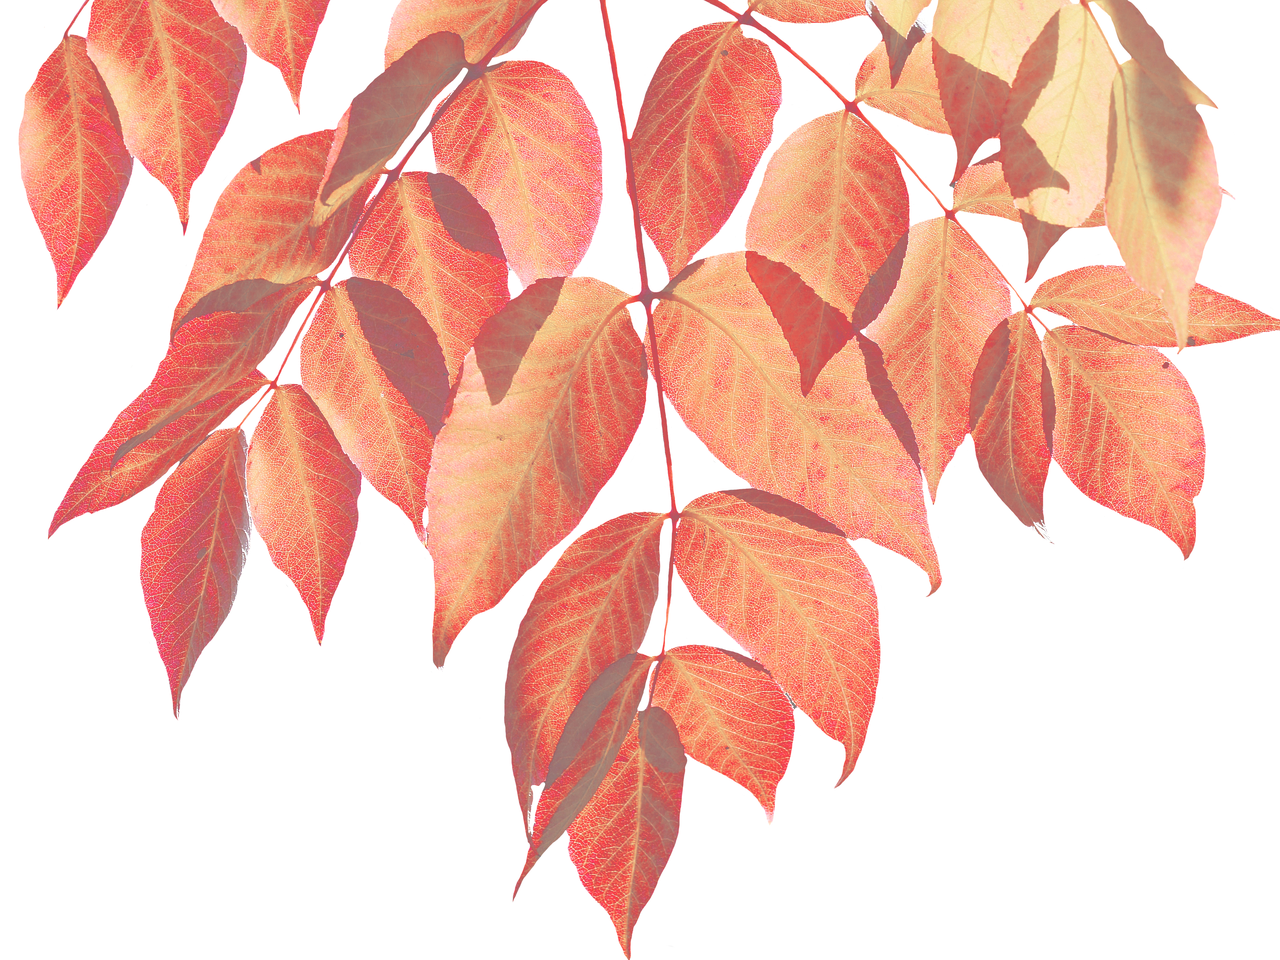 an abstract image of a red leafy plant